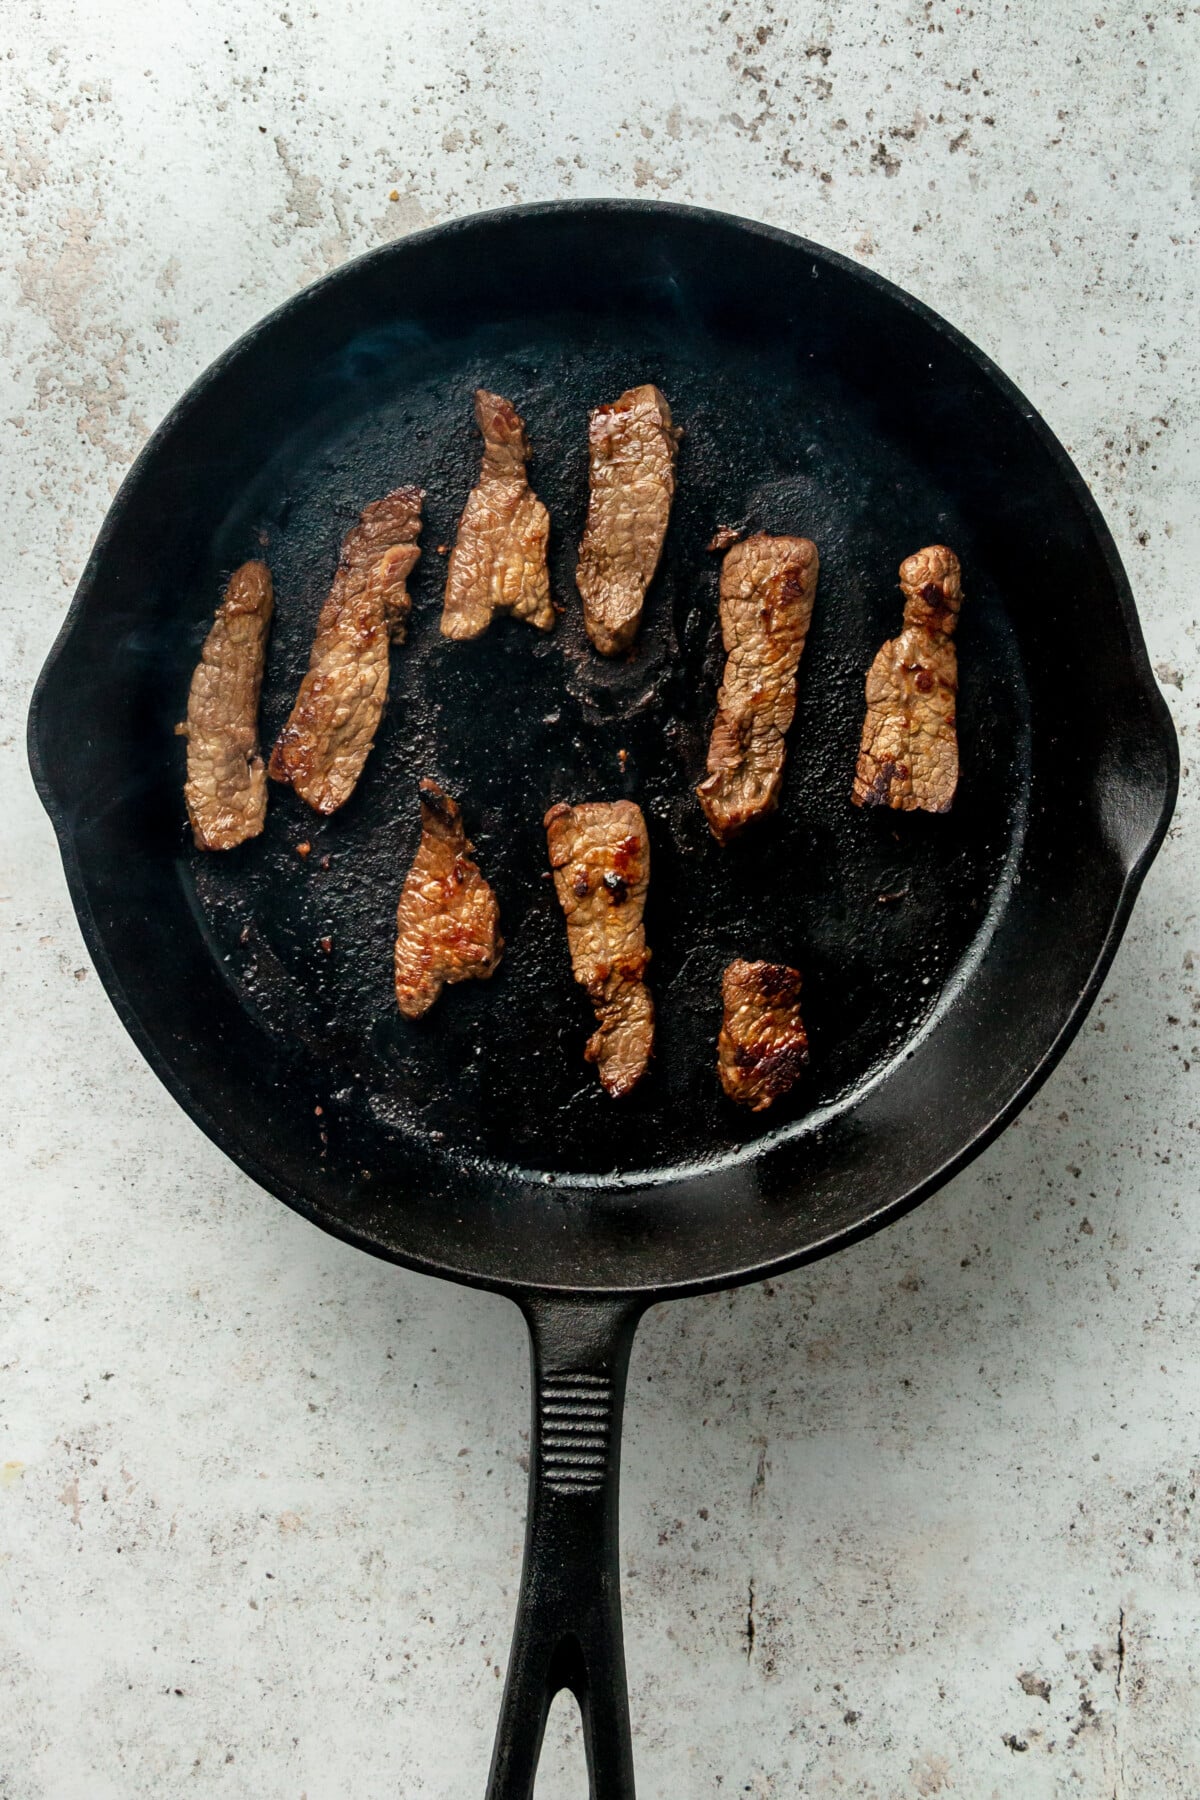 Marinated beef strips sit in a cast iron skillet on a light grey surface.